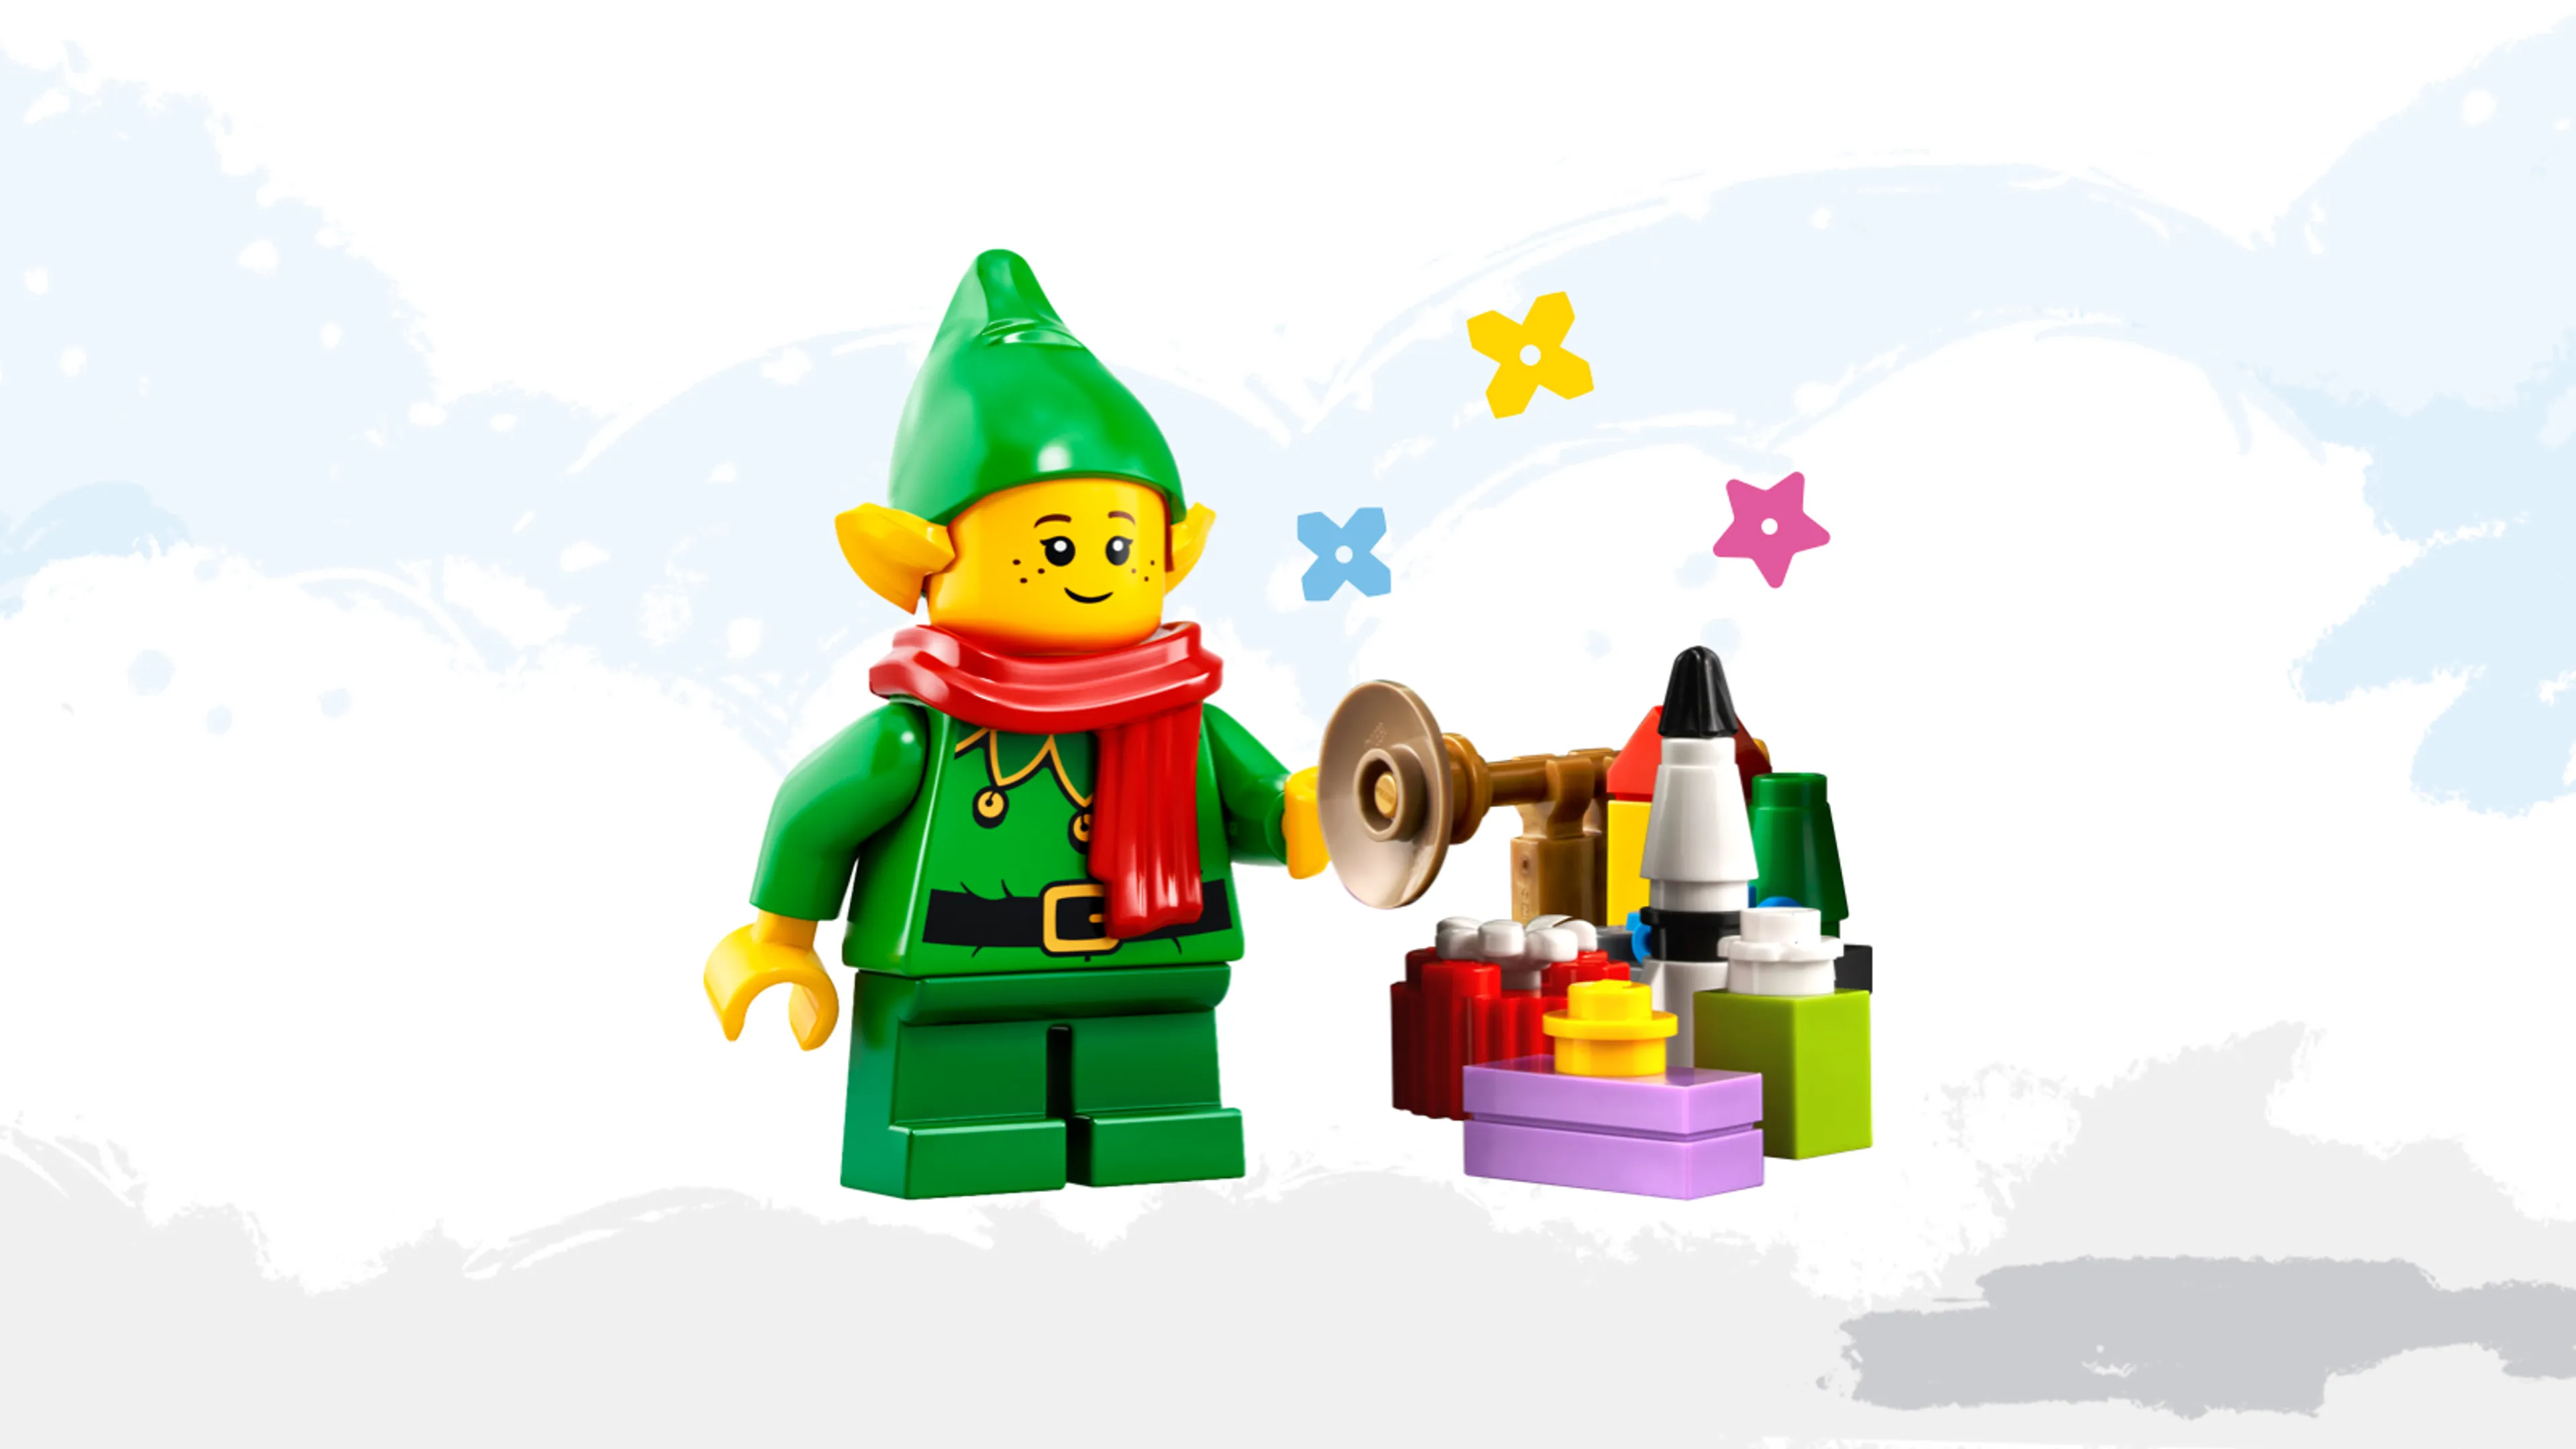 An elf minifigure with a pile of presents